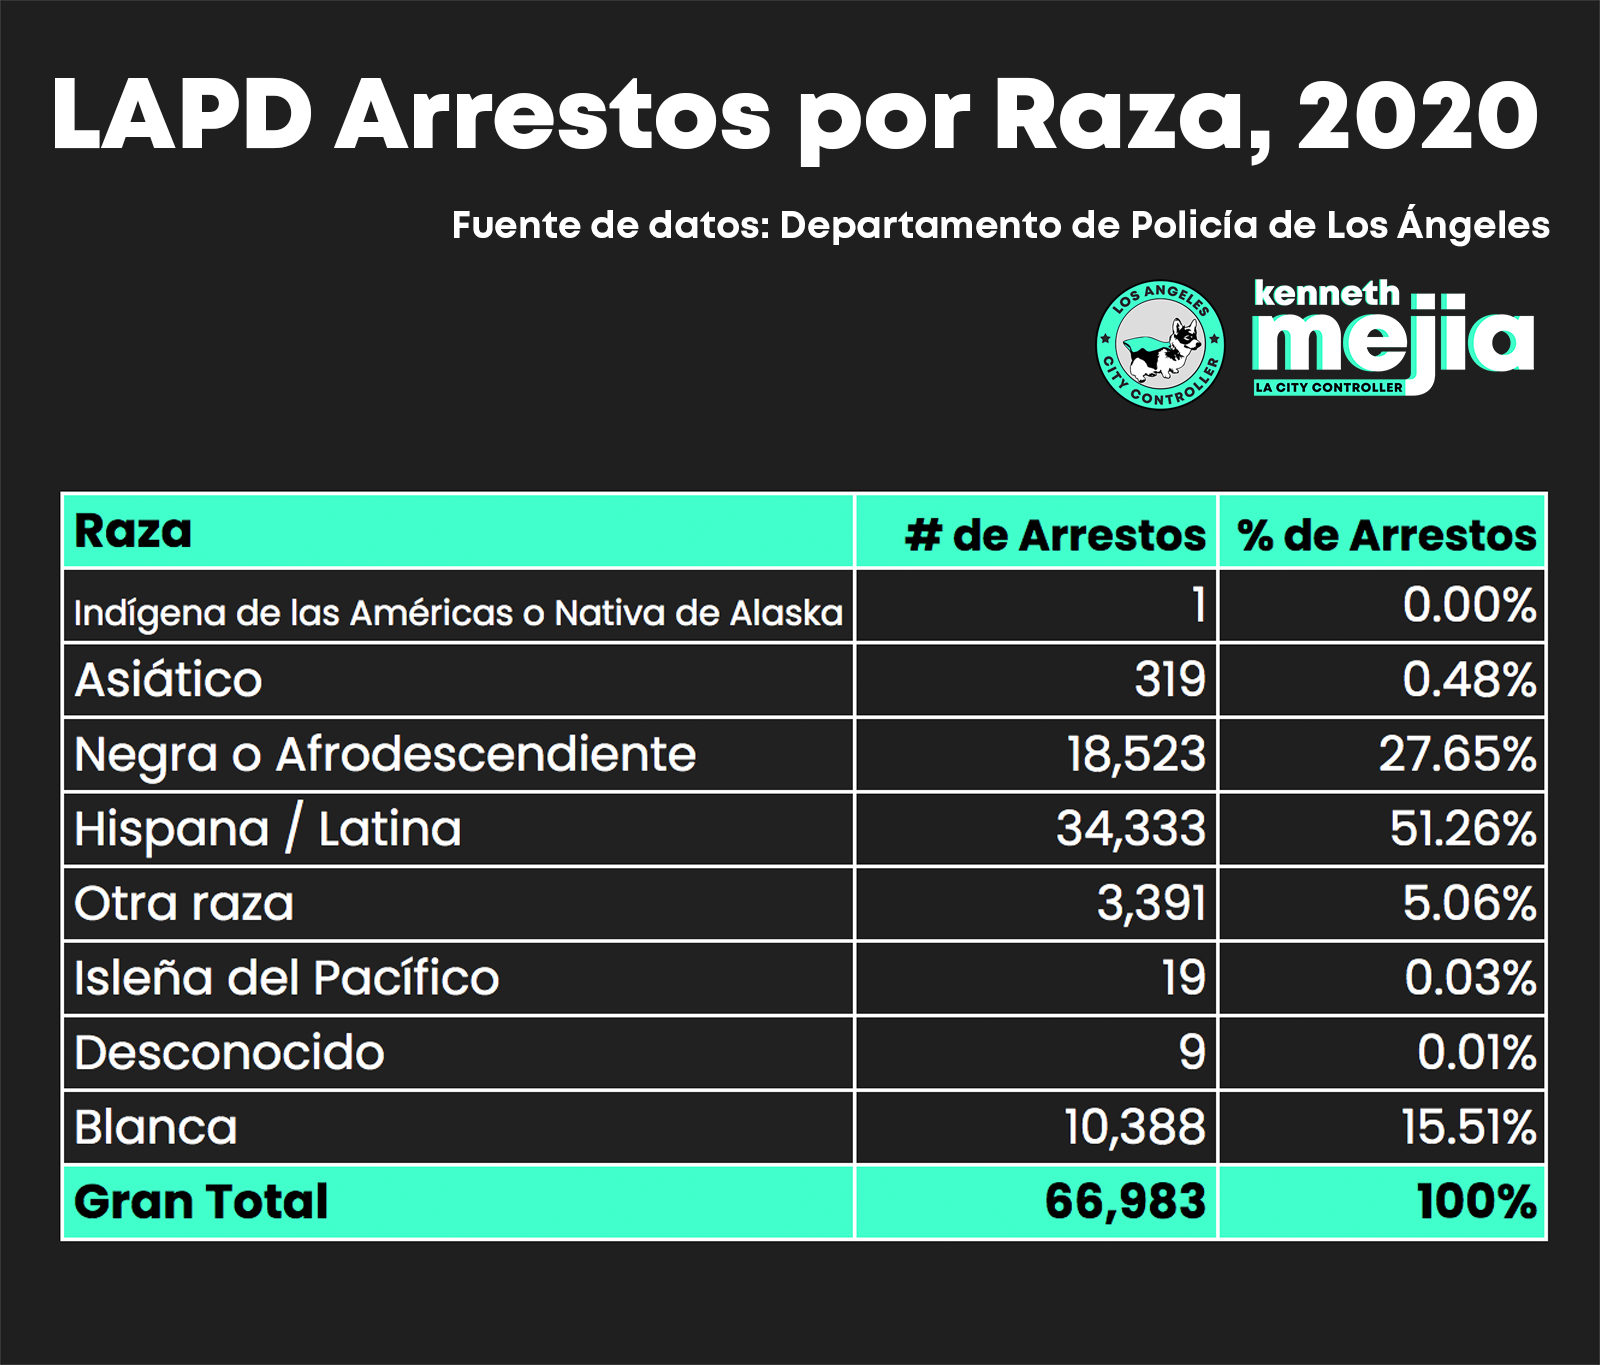 A bar chart of LAPD Arrests by Council District, 2020. There are fewer arrests overall compared to 2019. There are 15 Council Districts. Council District 14 has the highest number of arrests, at around 7,500 arrests,  but is also fairly close in number of arrests to districts 8 and 9, which are around 6,000 arrests.  CDs 1, 6, 10, 11, and 13 each have around 5,000 arrests. The rest of the Council Districts have much fewer than 5,000  arrests. CDs 5 and 12 have the fewest number of arrests, at under 2,500 arrests each. Source of data is LAPD.